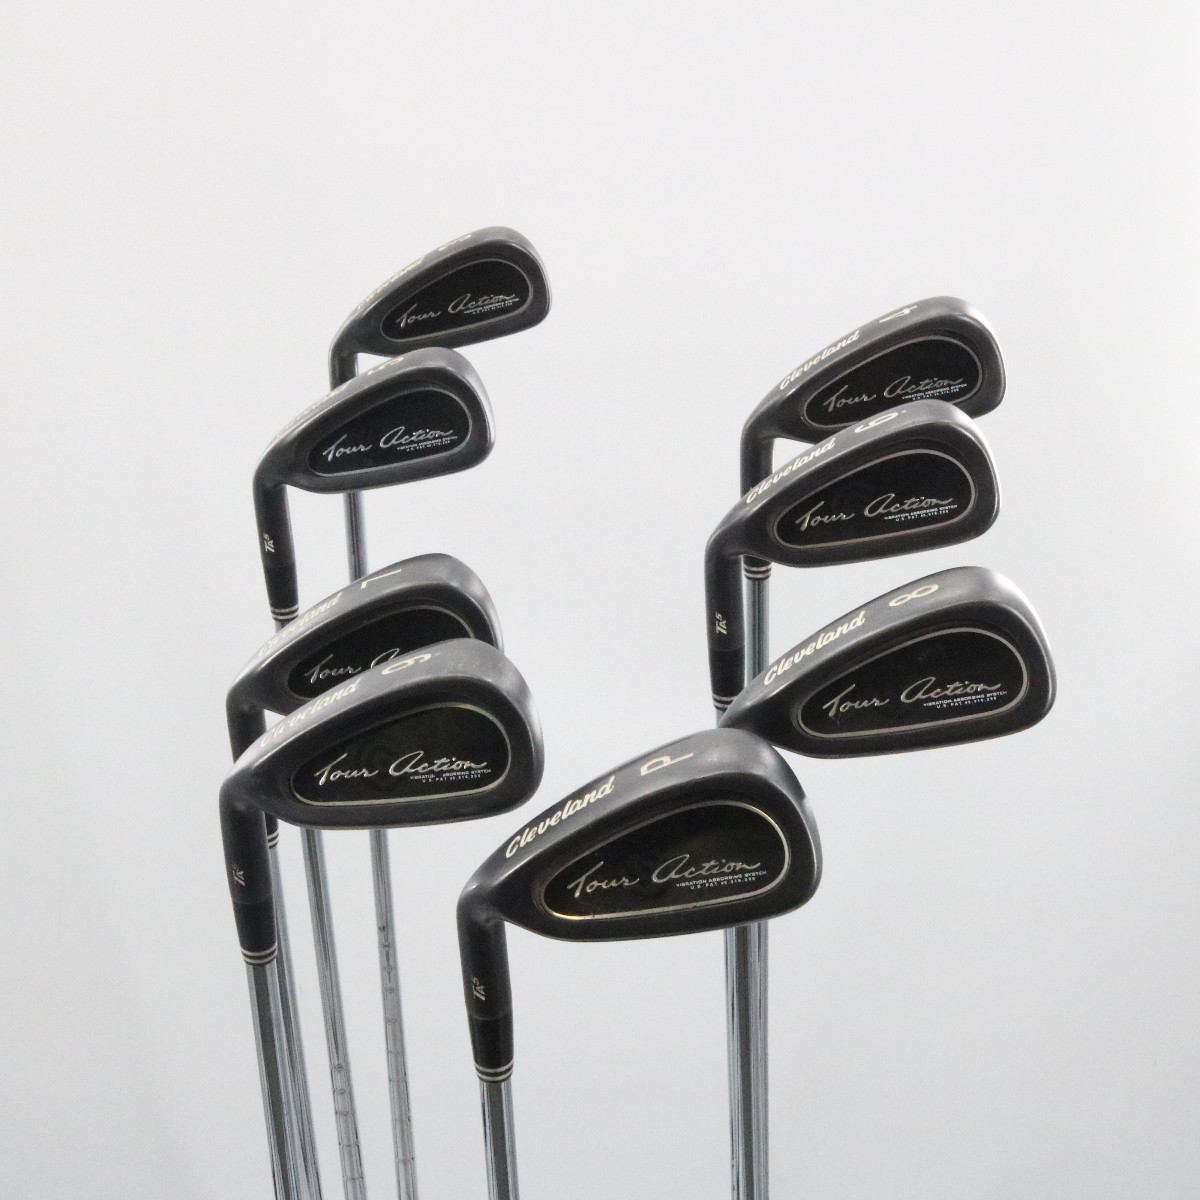 cleveland tour action ta5 irons review